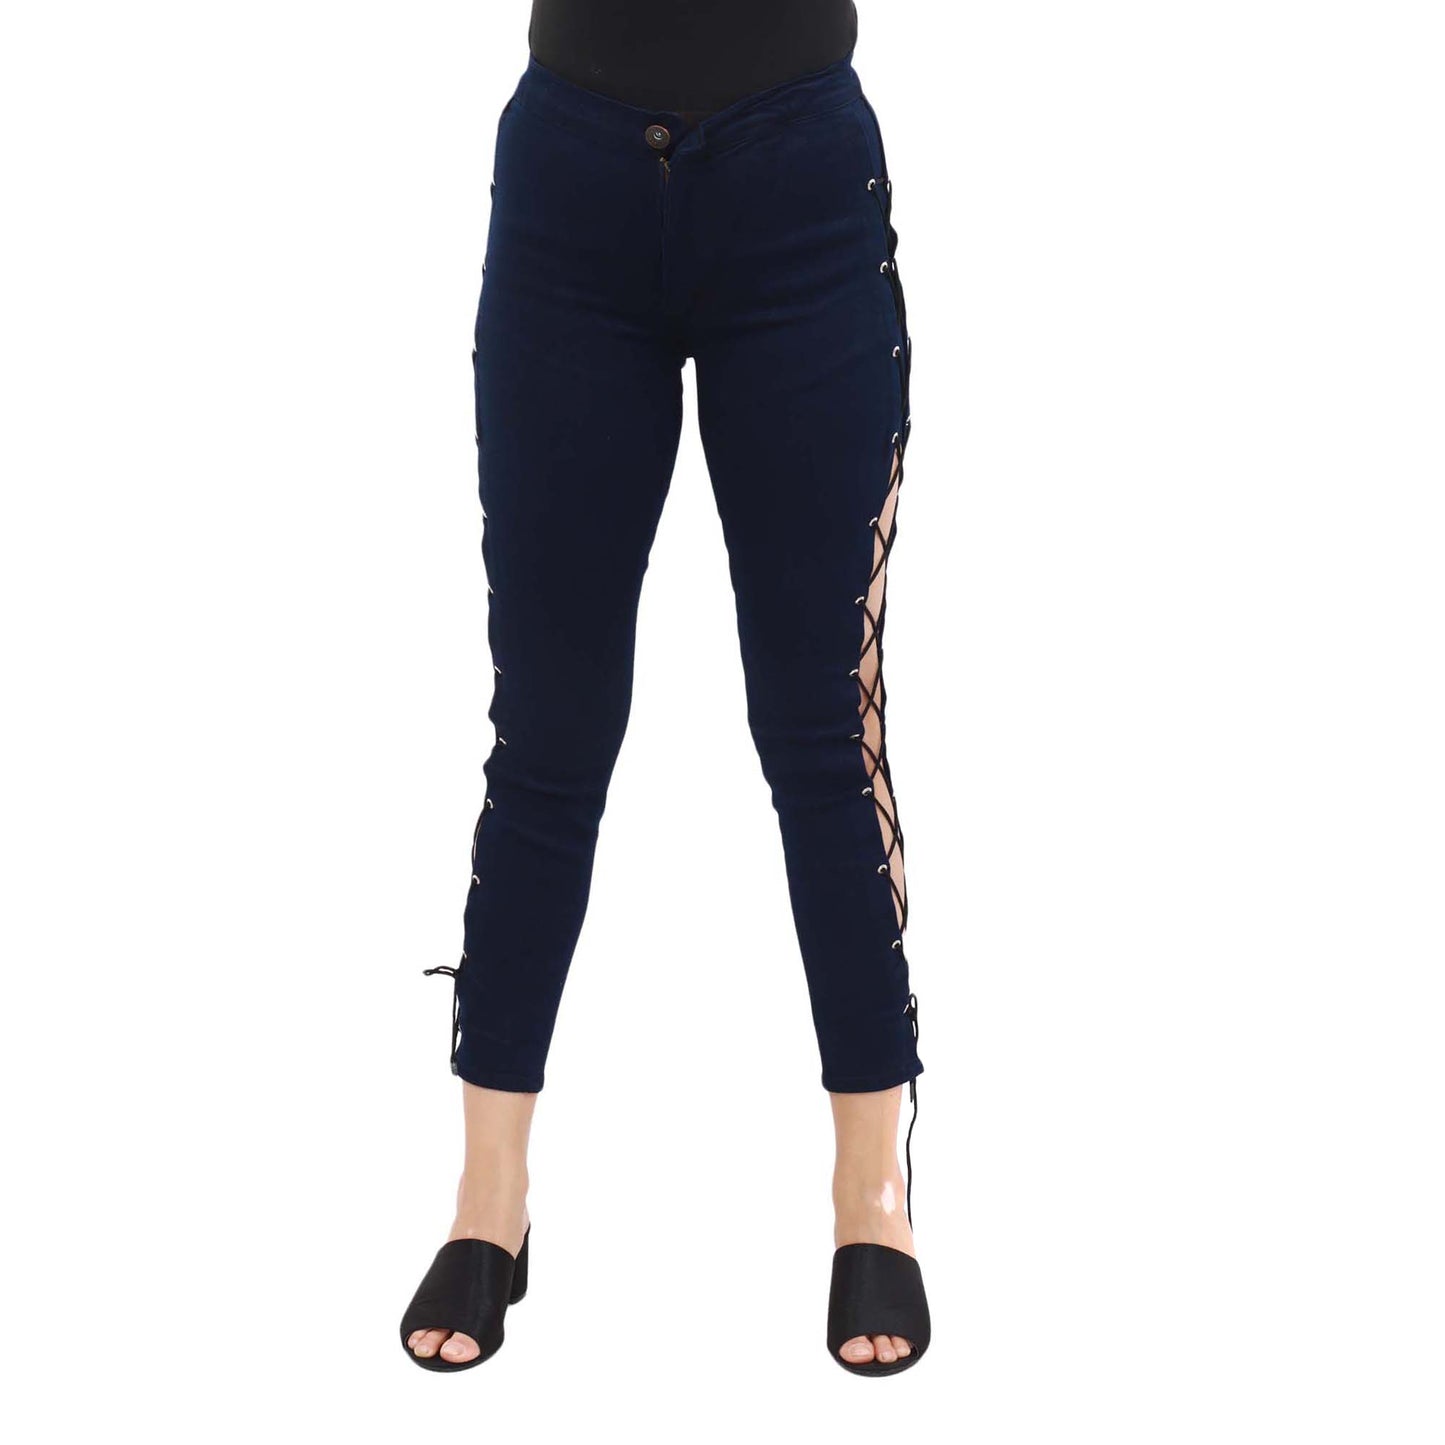 Dark blue Skinny Jeans Pant with lace design